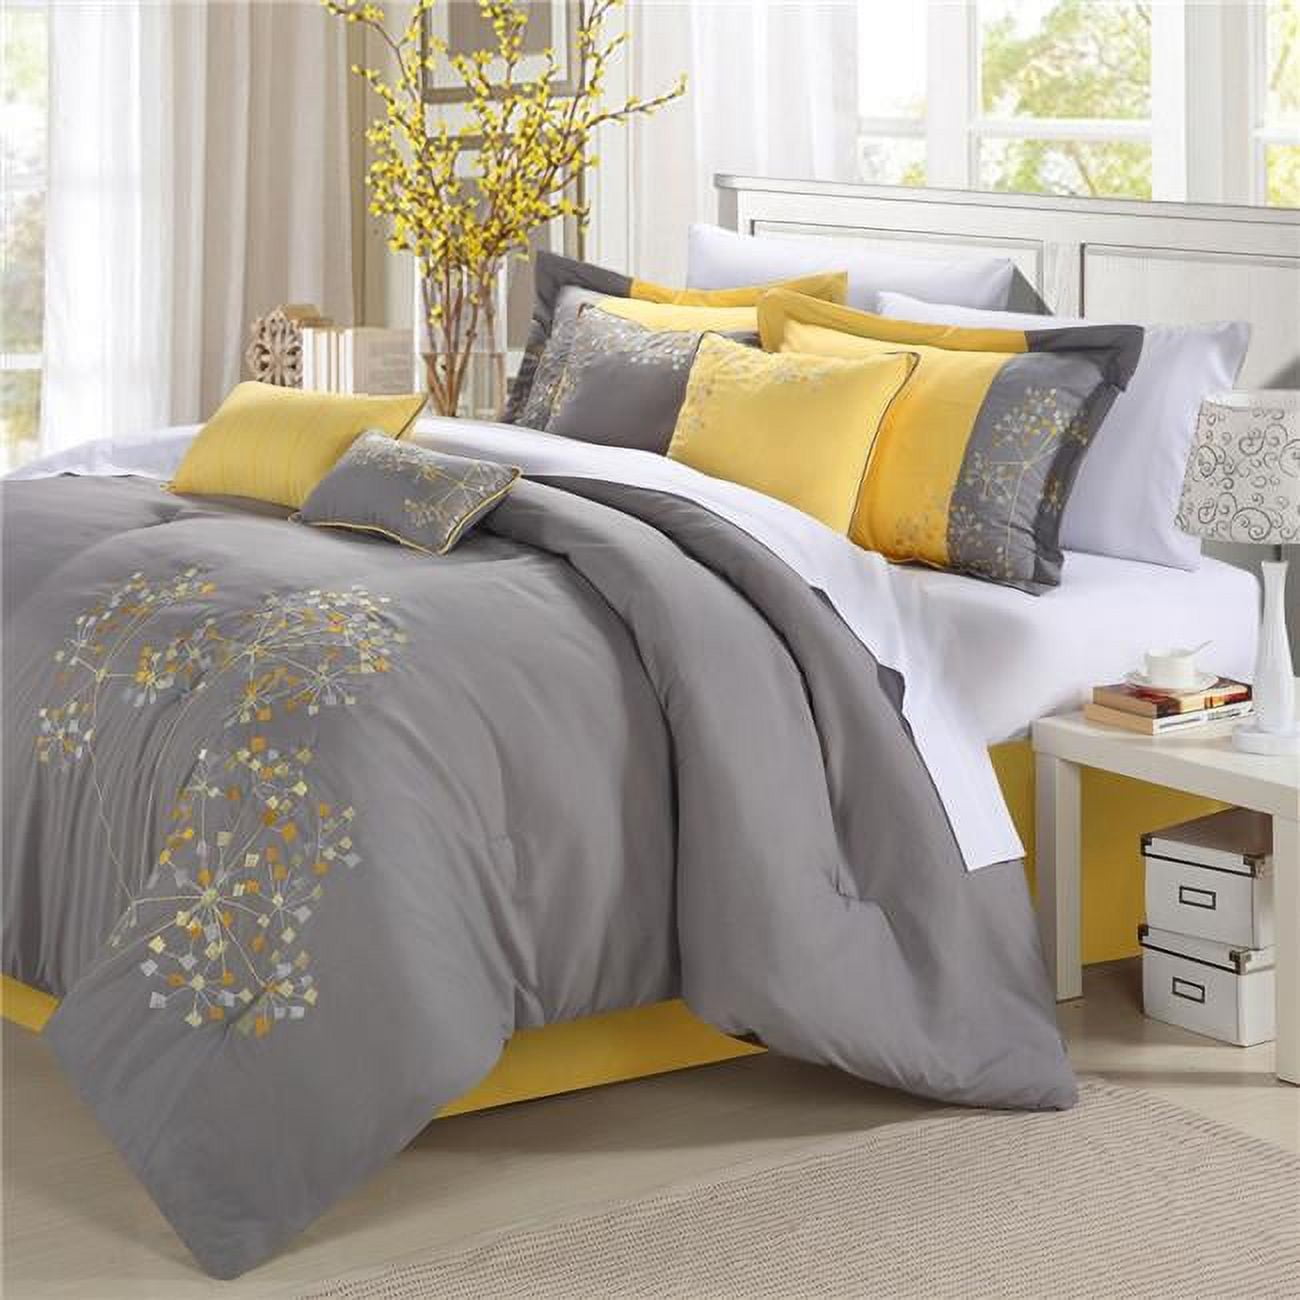 33-91-k-11-us Pink Floral 12 Piece Bed In A Bag Embroidered Comforter Set With 4 Piece Sheet Set, Yellow - King